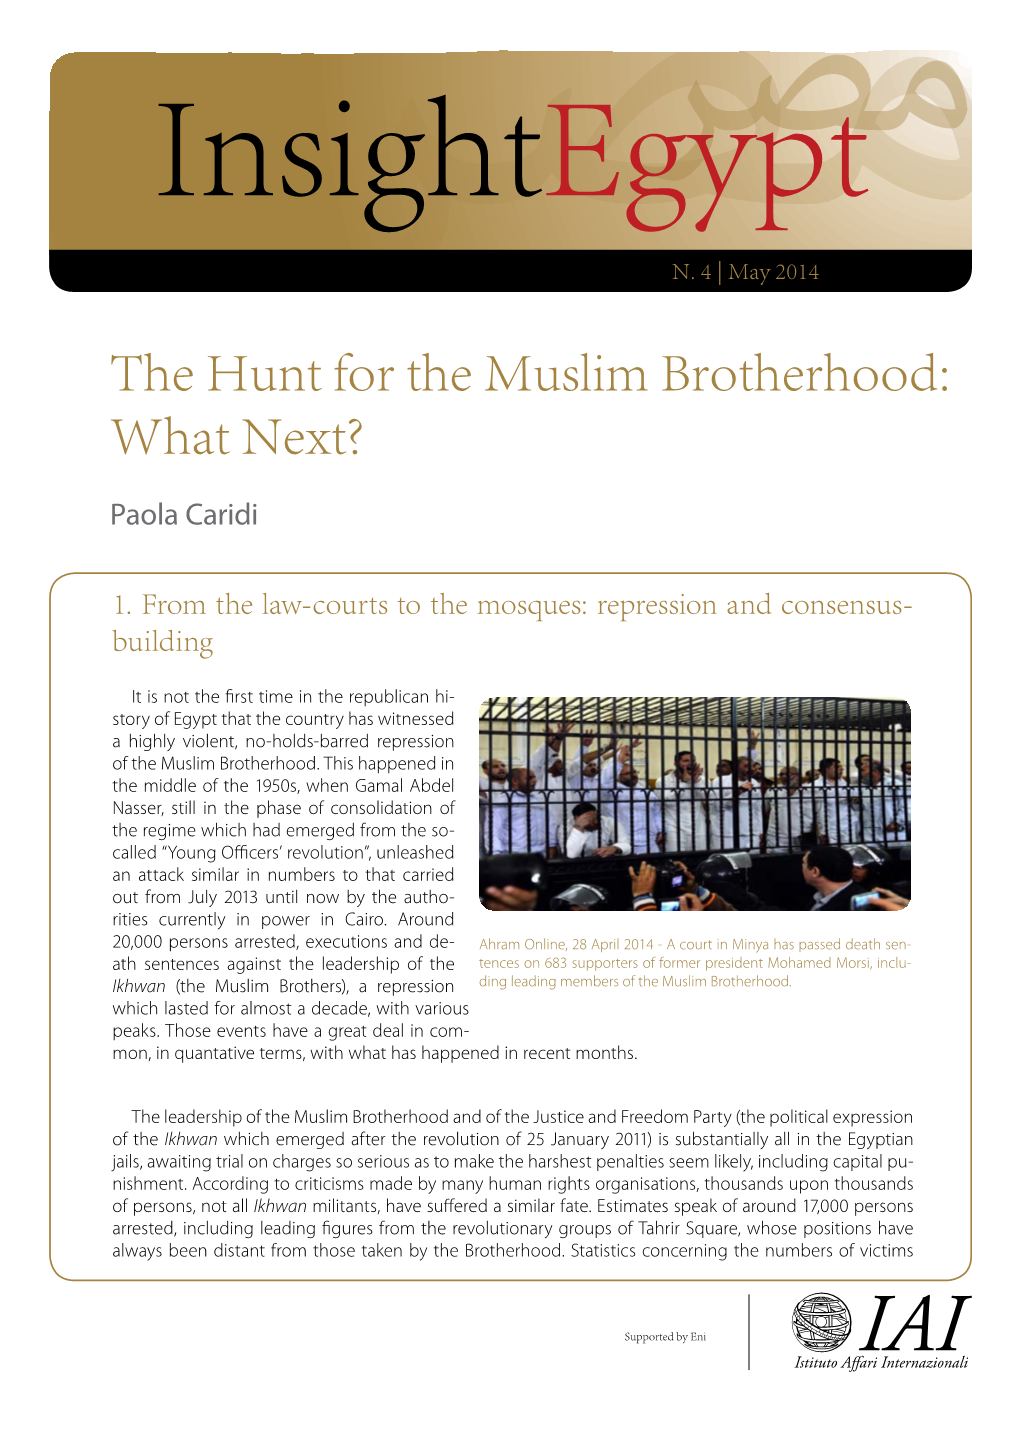 The Hunt for the Muslim Brotherhood: What Next?